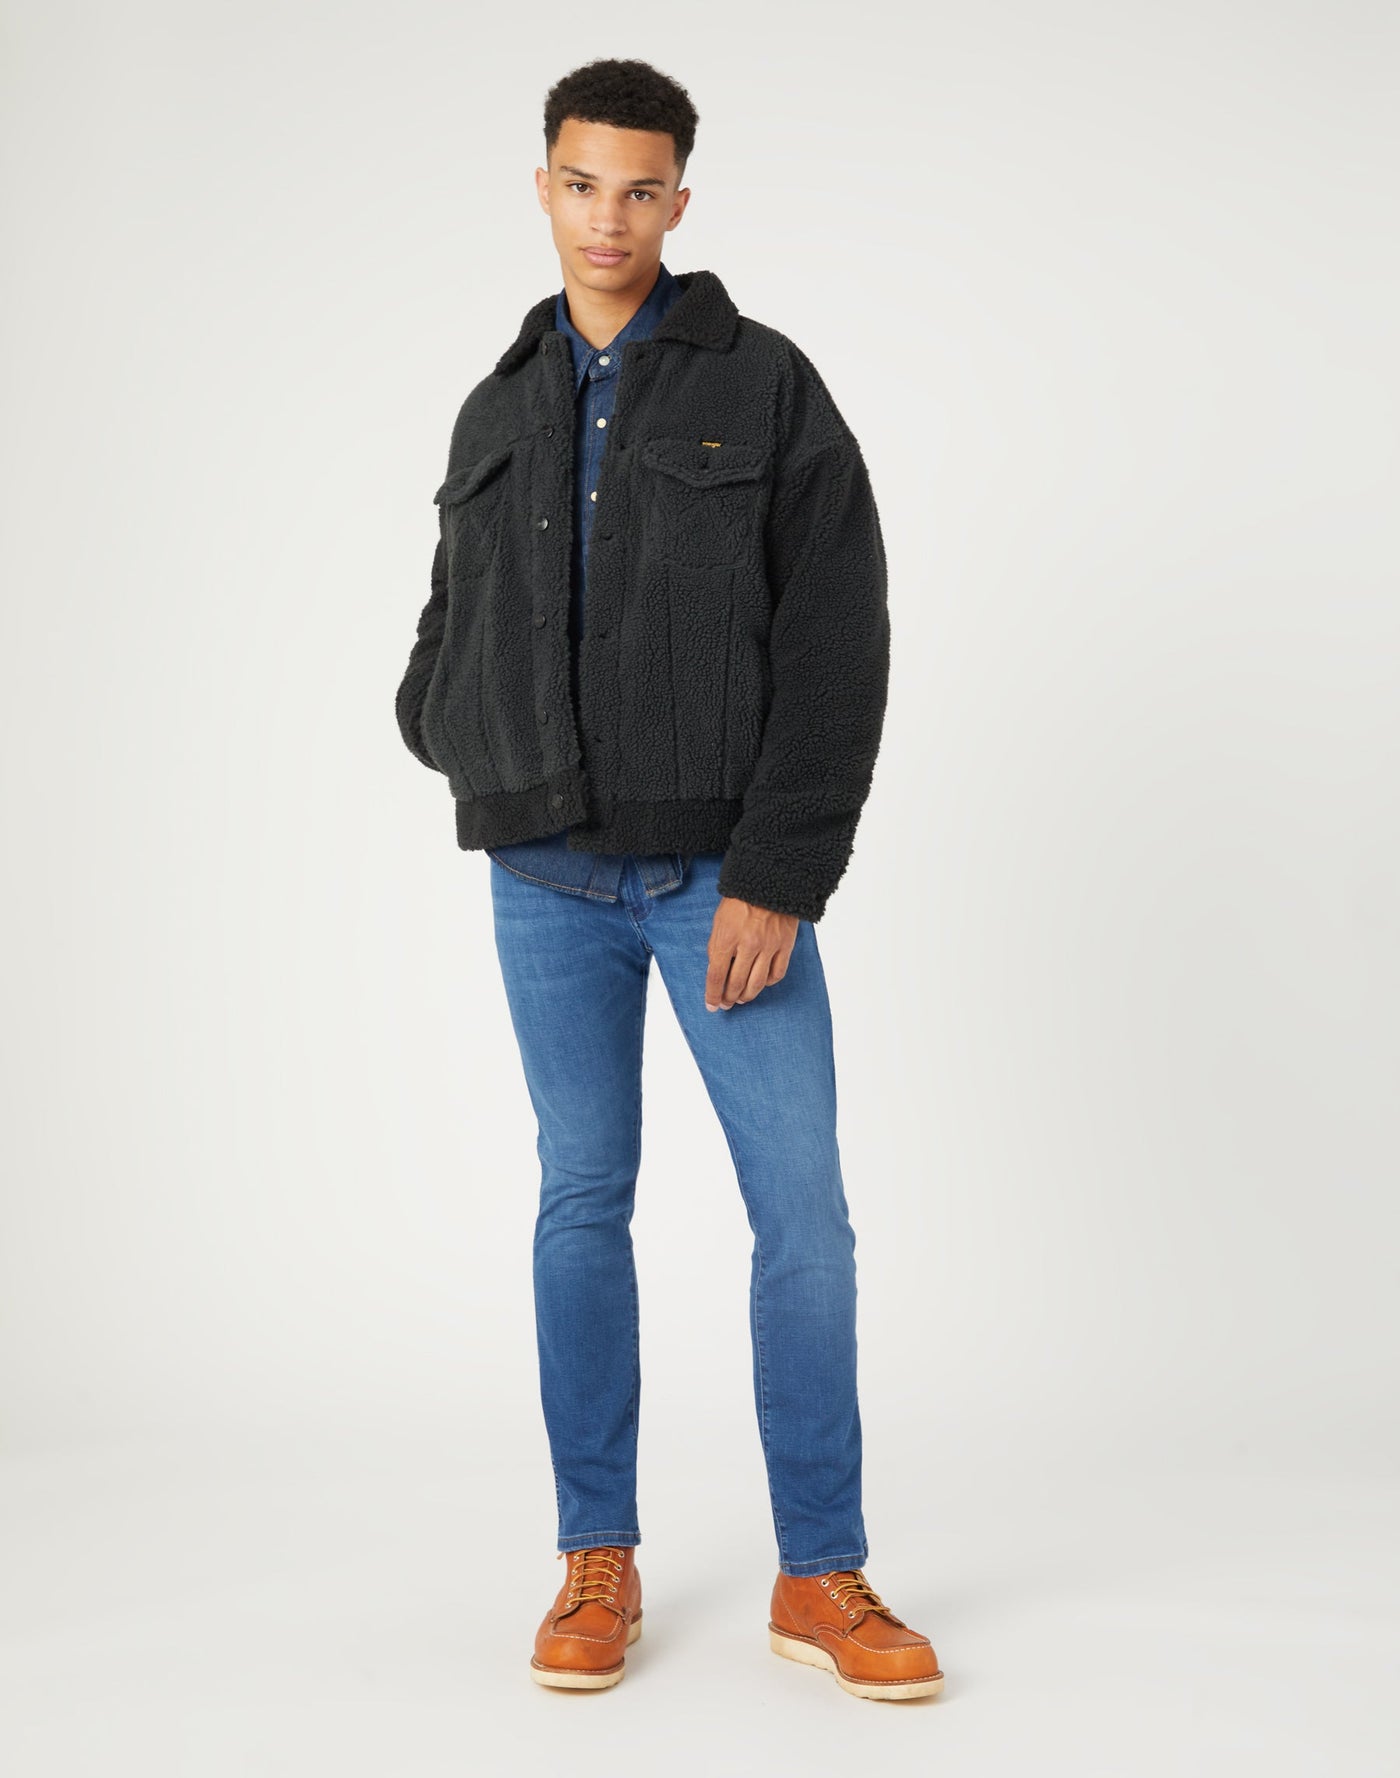 Larston High Stretch in Fearless Jeans Wrangler   